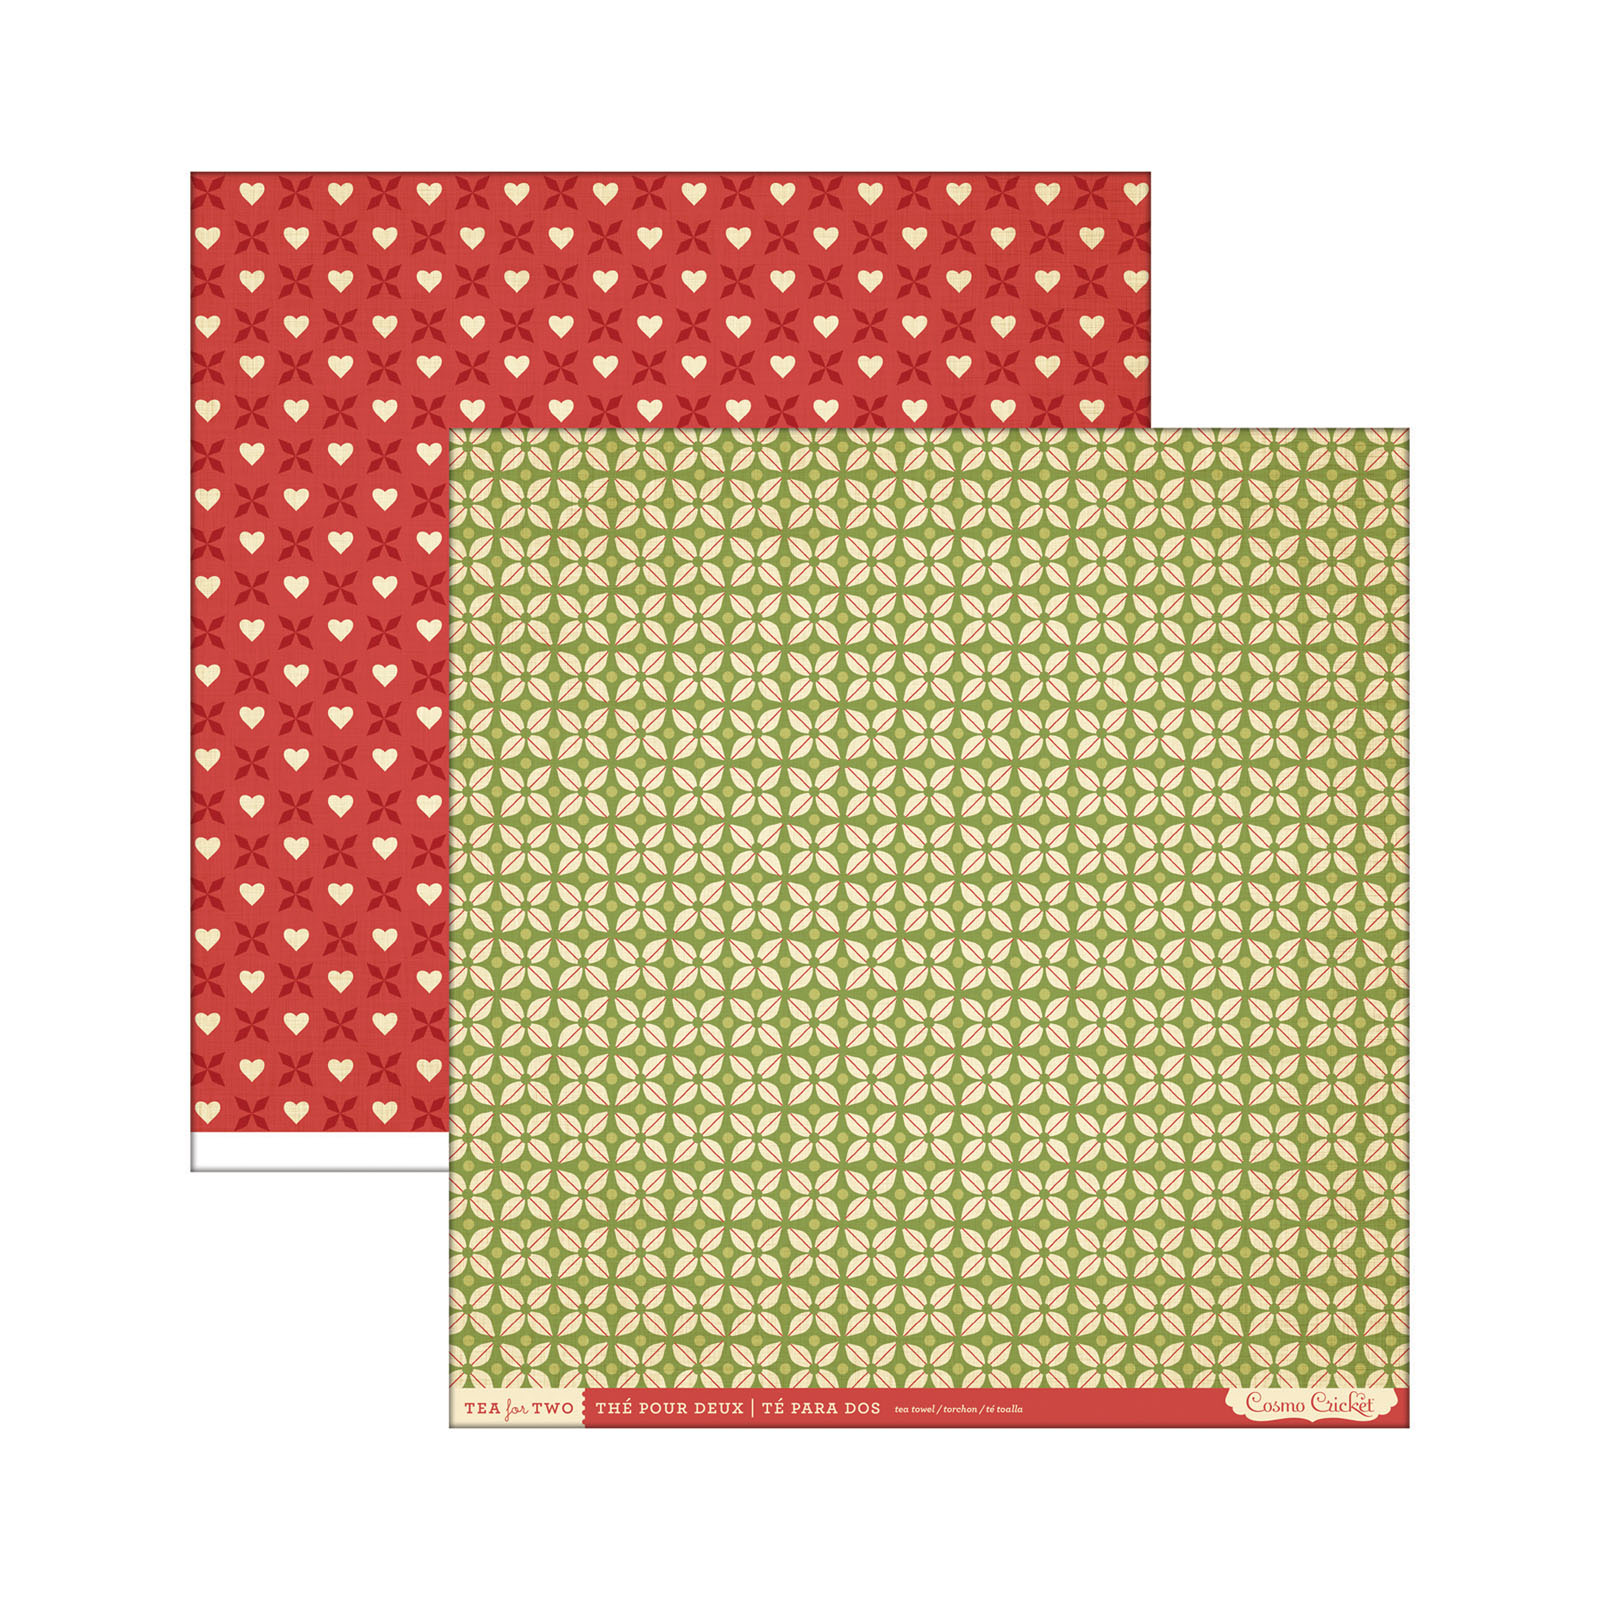 Cosmo cricket • Tea for two paper 12x12" x1 Towel